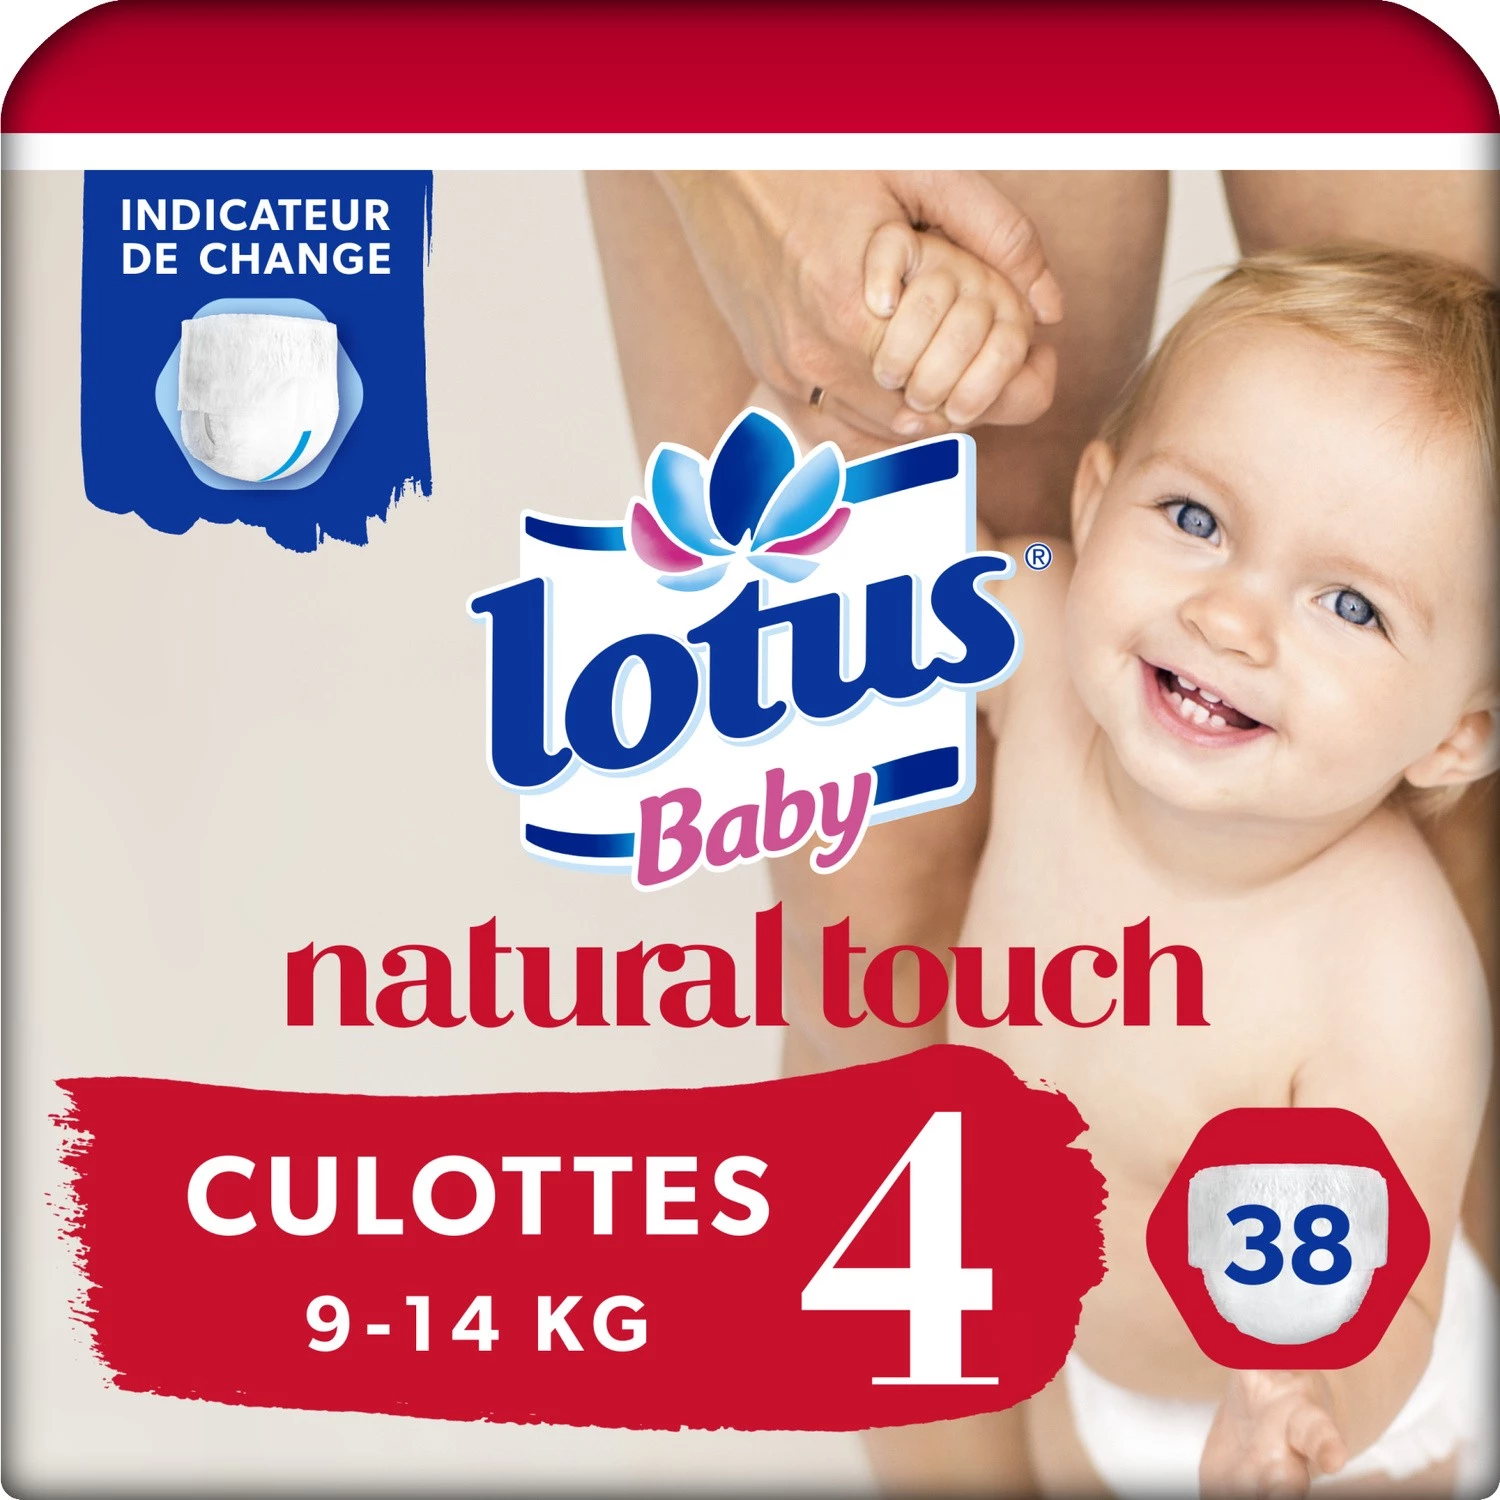 Sofas-Coulottes Natural Touch T4 x38 - LOTUS BABY